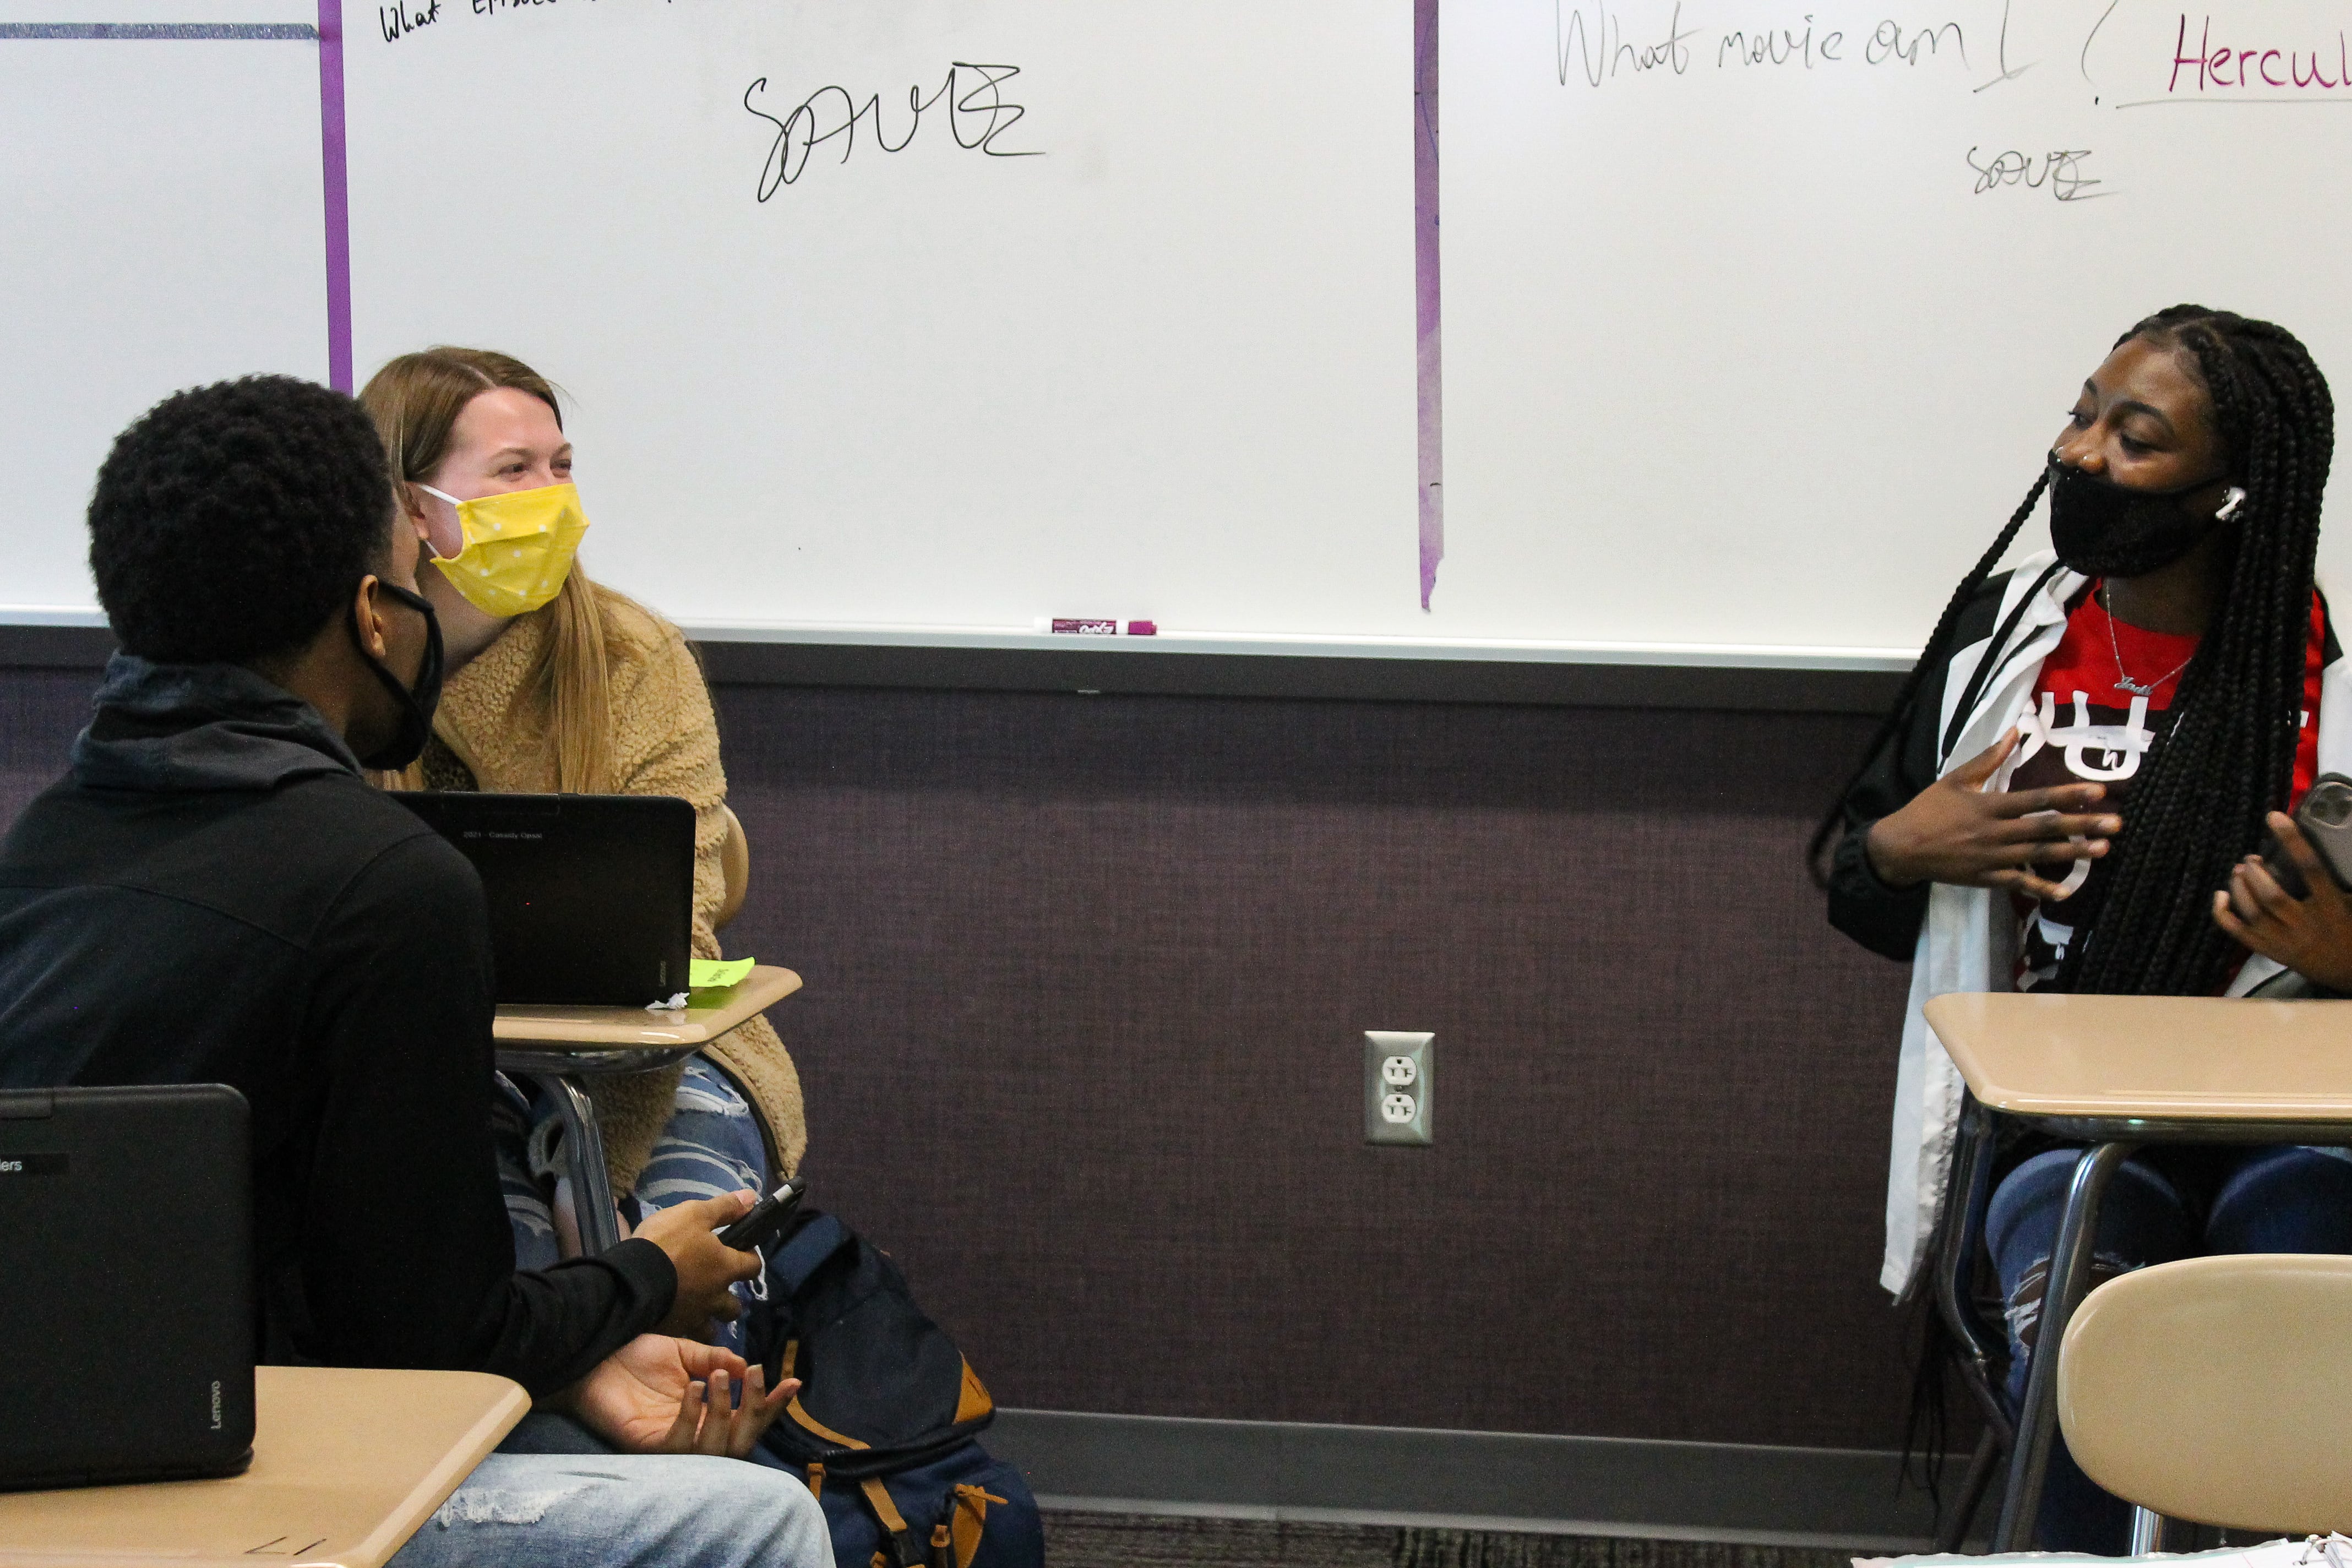 In front of a classroom white board, a student in a yellow sweater wearing a bright yellow mask sits next to a student in a black sweatshirt with a black mask. They are talking to another student seated in a desk several feet away with a red shirt and a black face mask holding her hand to her chest in the middle of speaking.